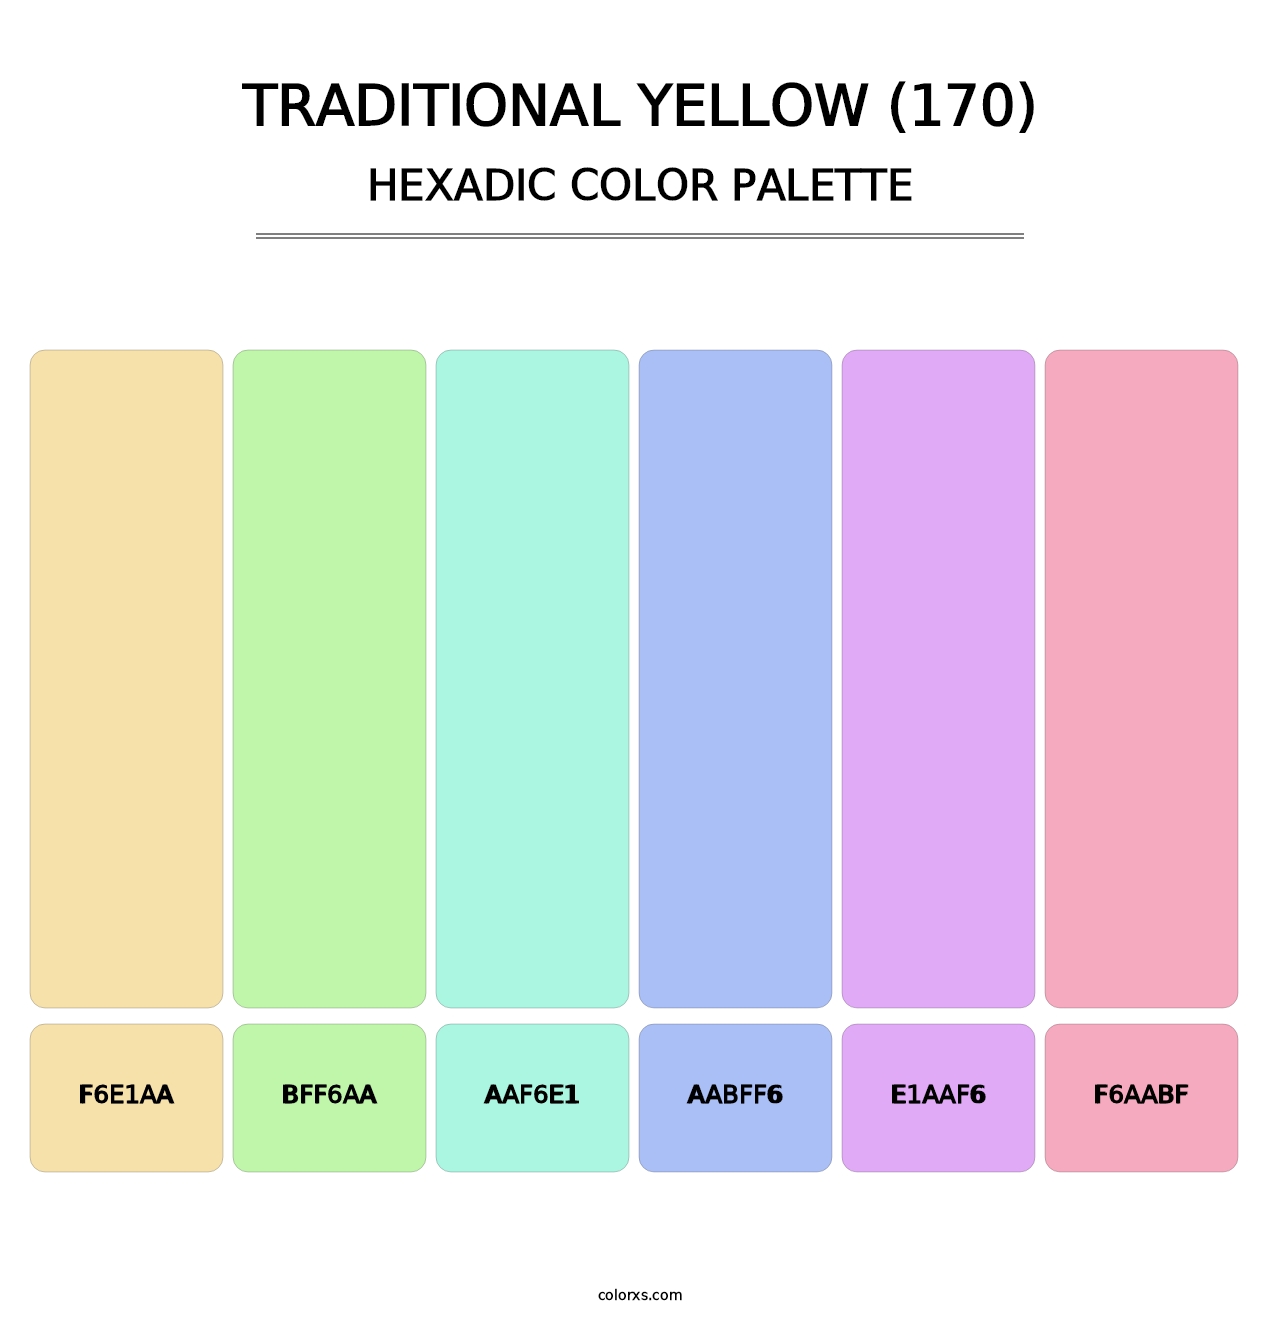 Traditional Yellow (170) - Hexadic Color Palette